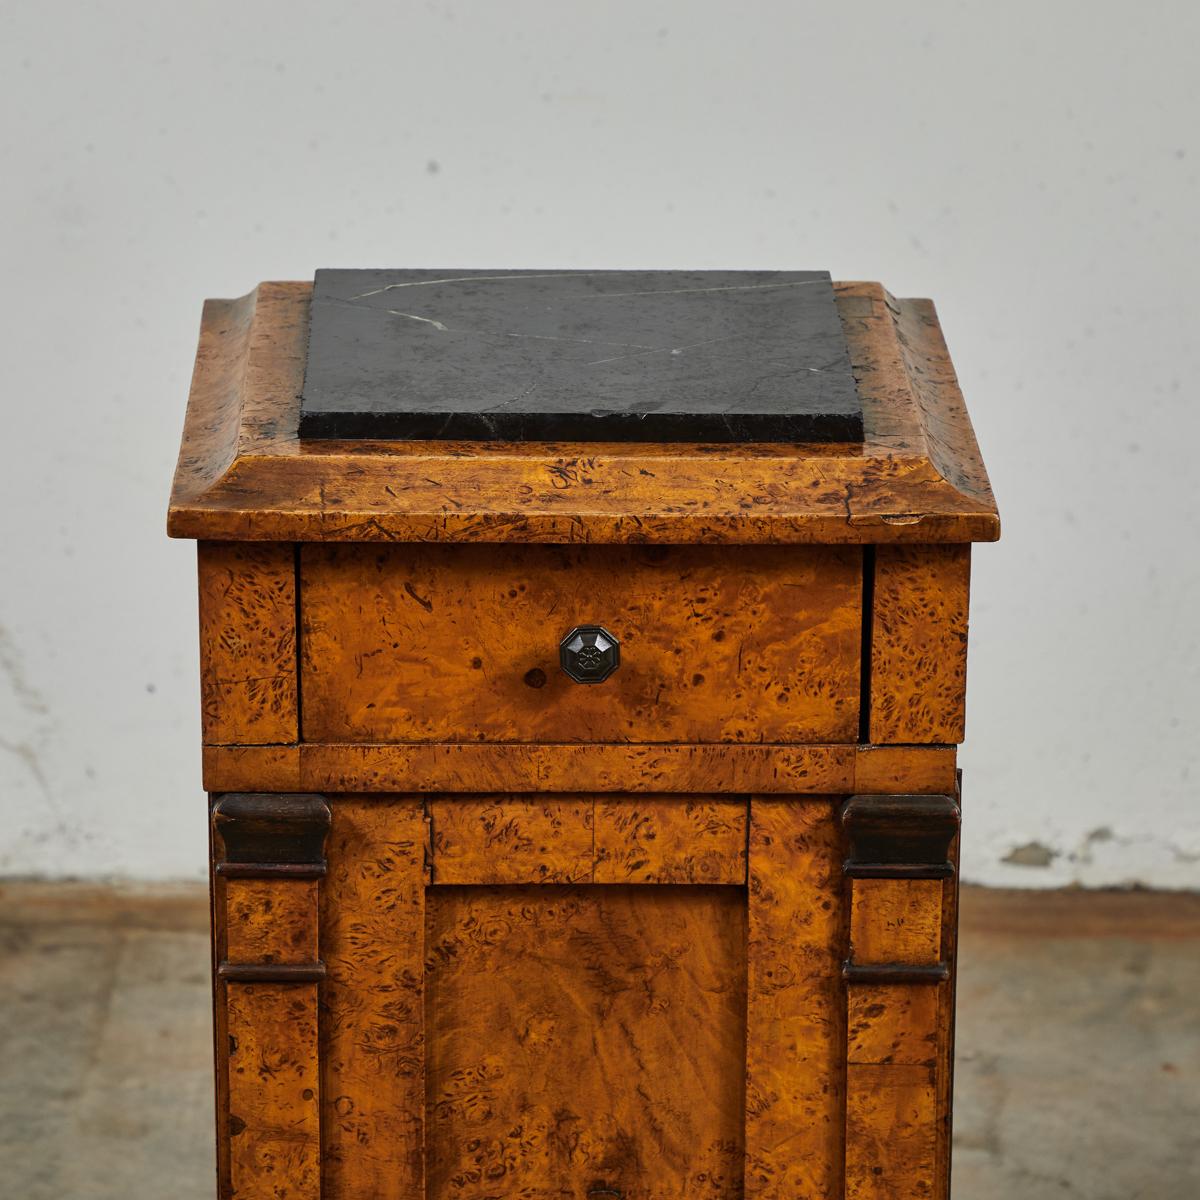 English mid-19th-century burled wood stand with black marble top, and single door storage. With petite iron handles and stained wood detailing, this piece makes a charming base for any sculpture or decorative object.

England, circa